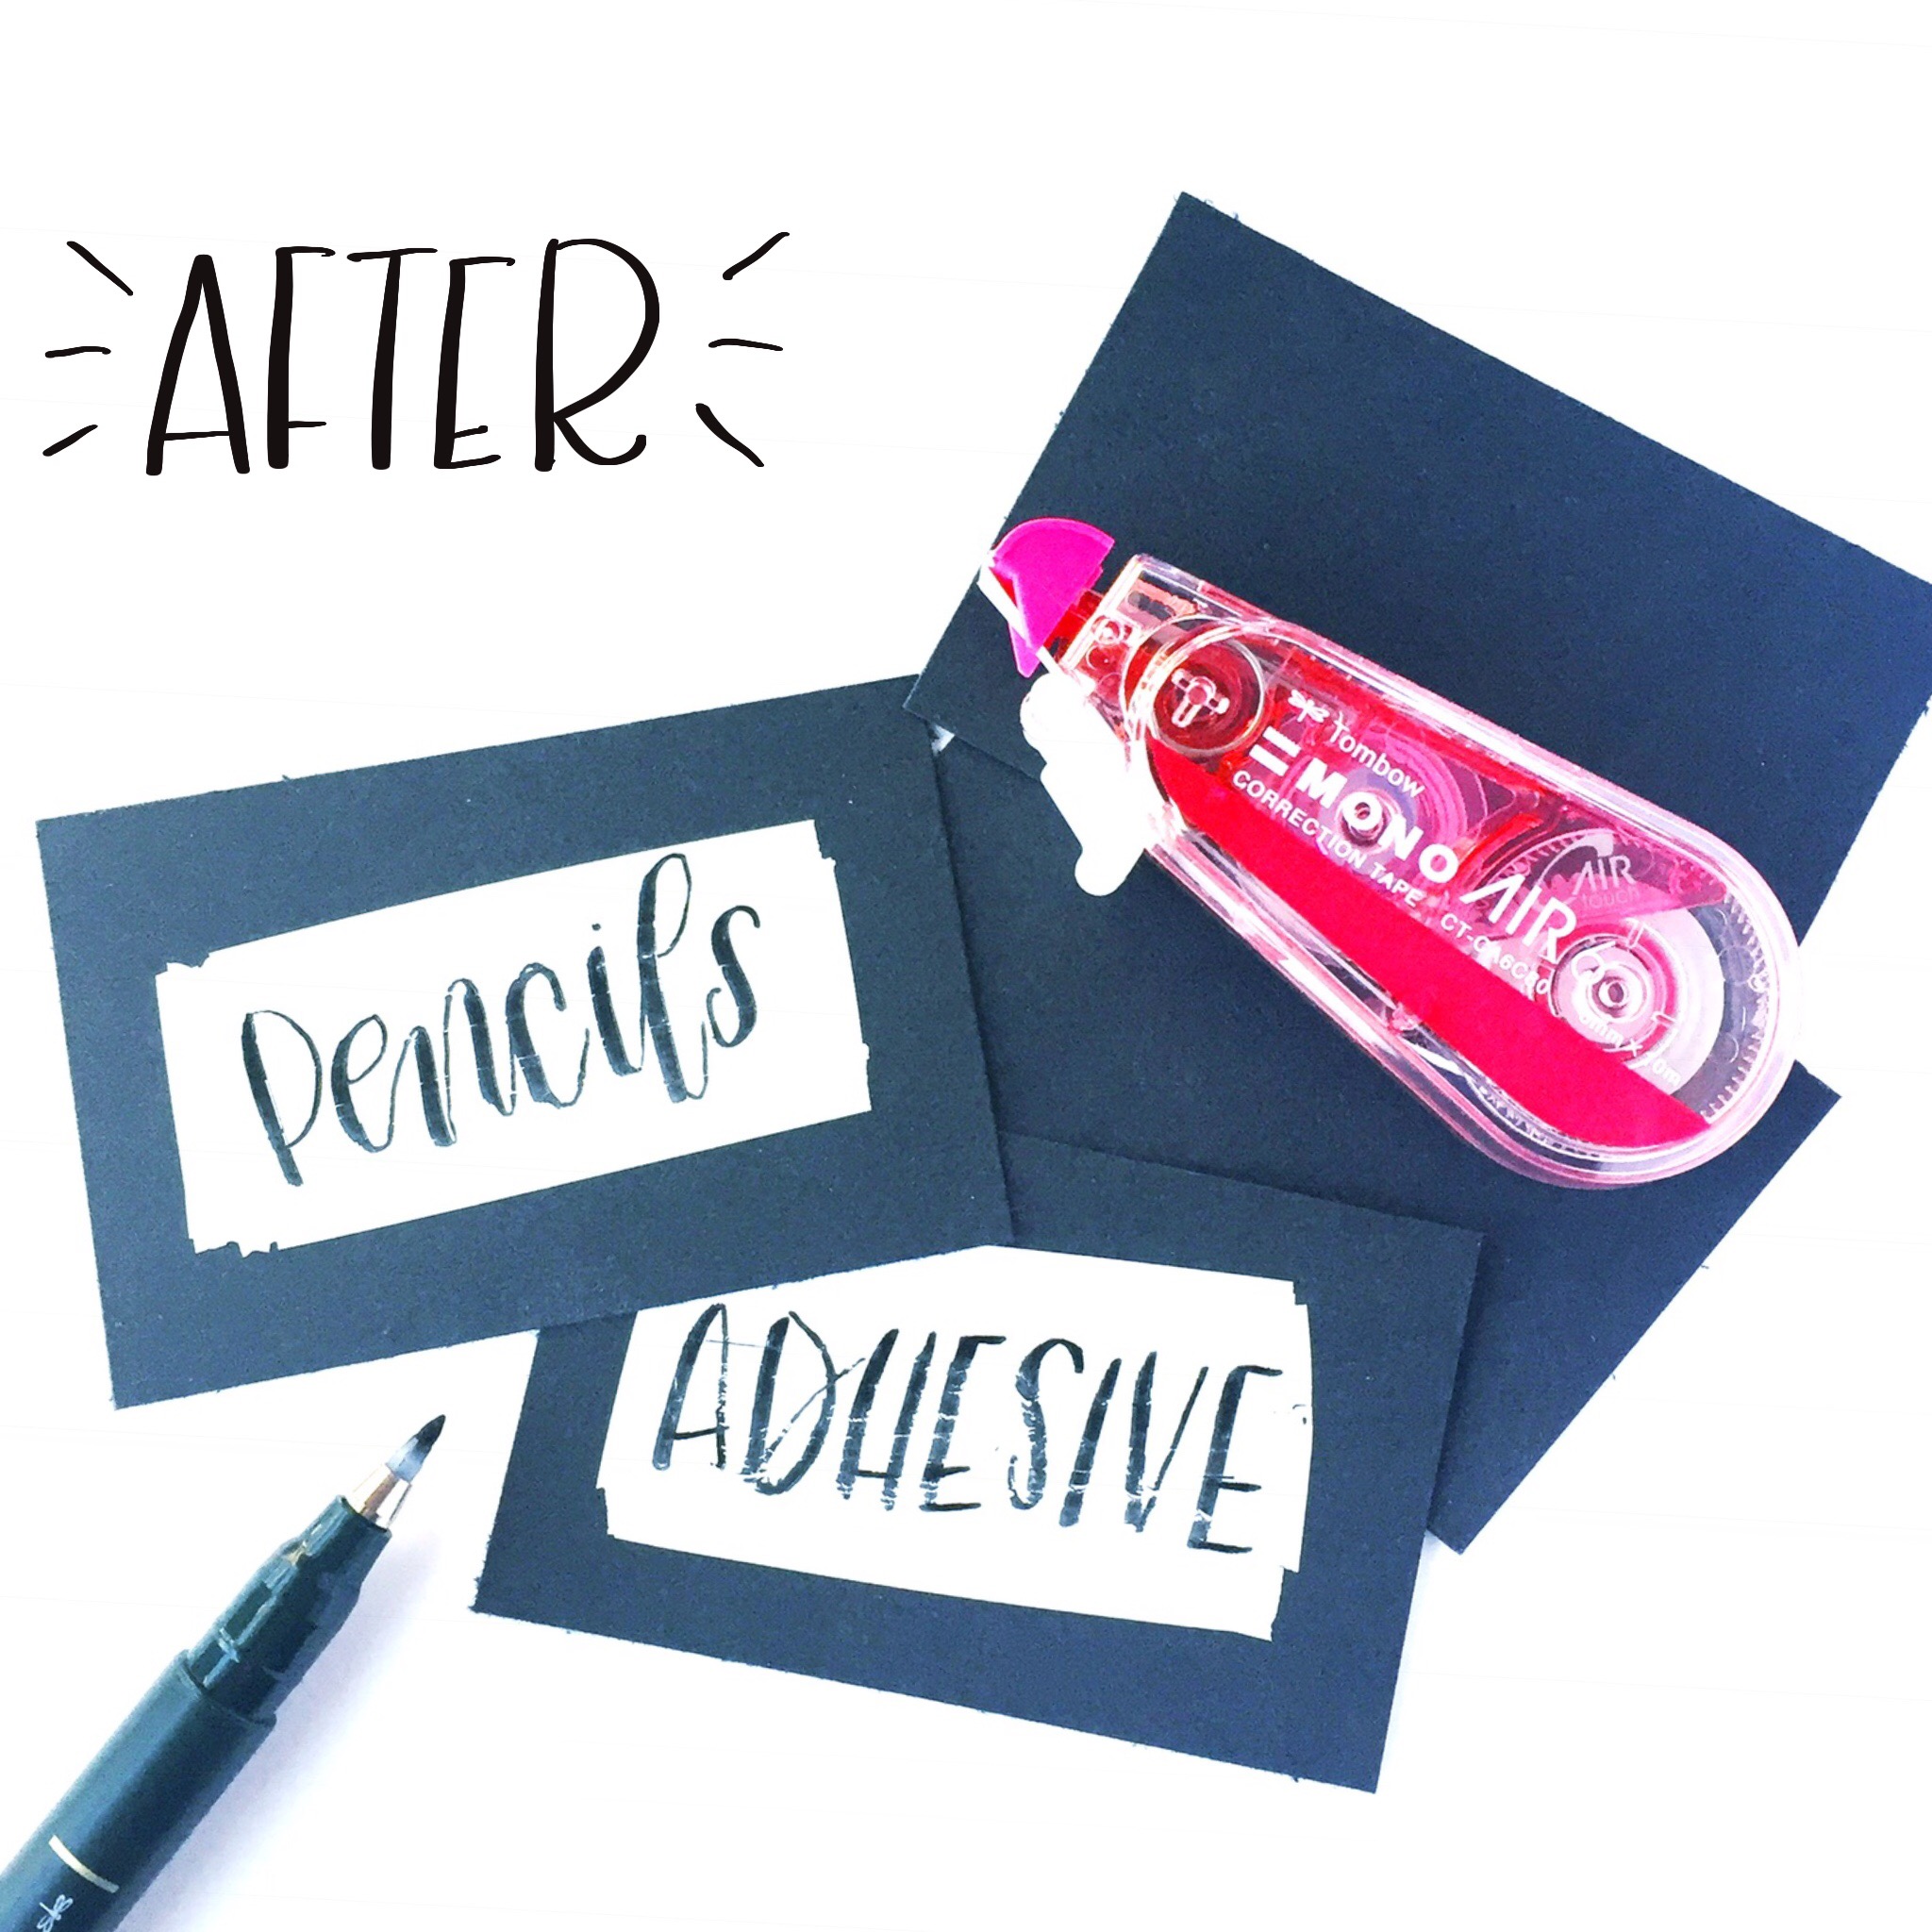 Use Tombow Mono Air Correction Tape to correct and create things for organization and day to day living!